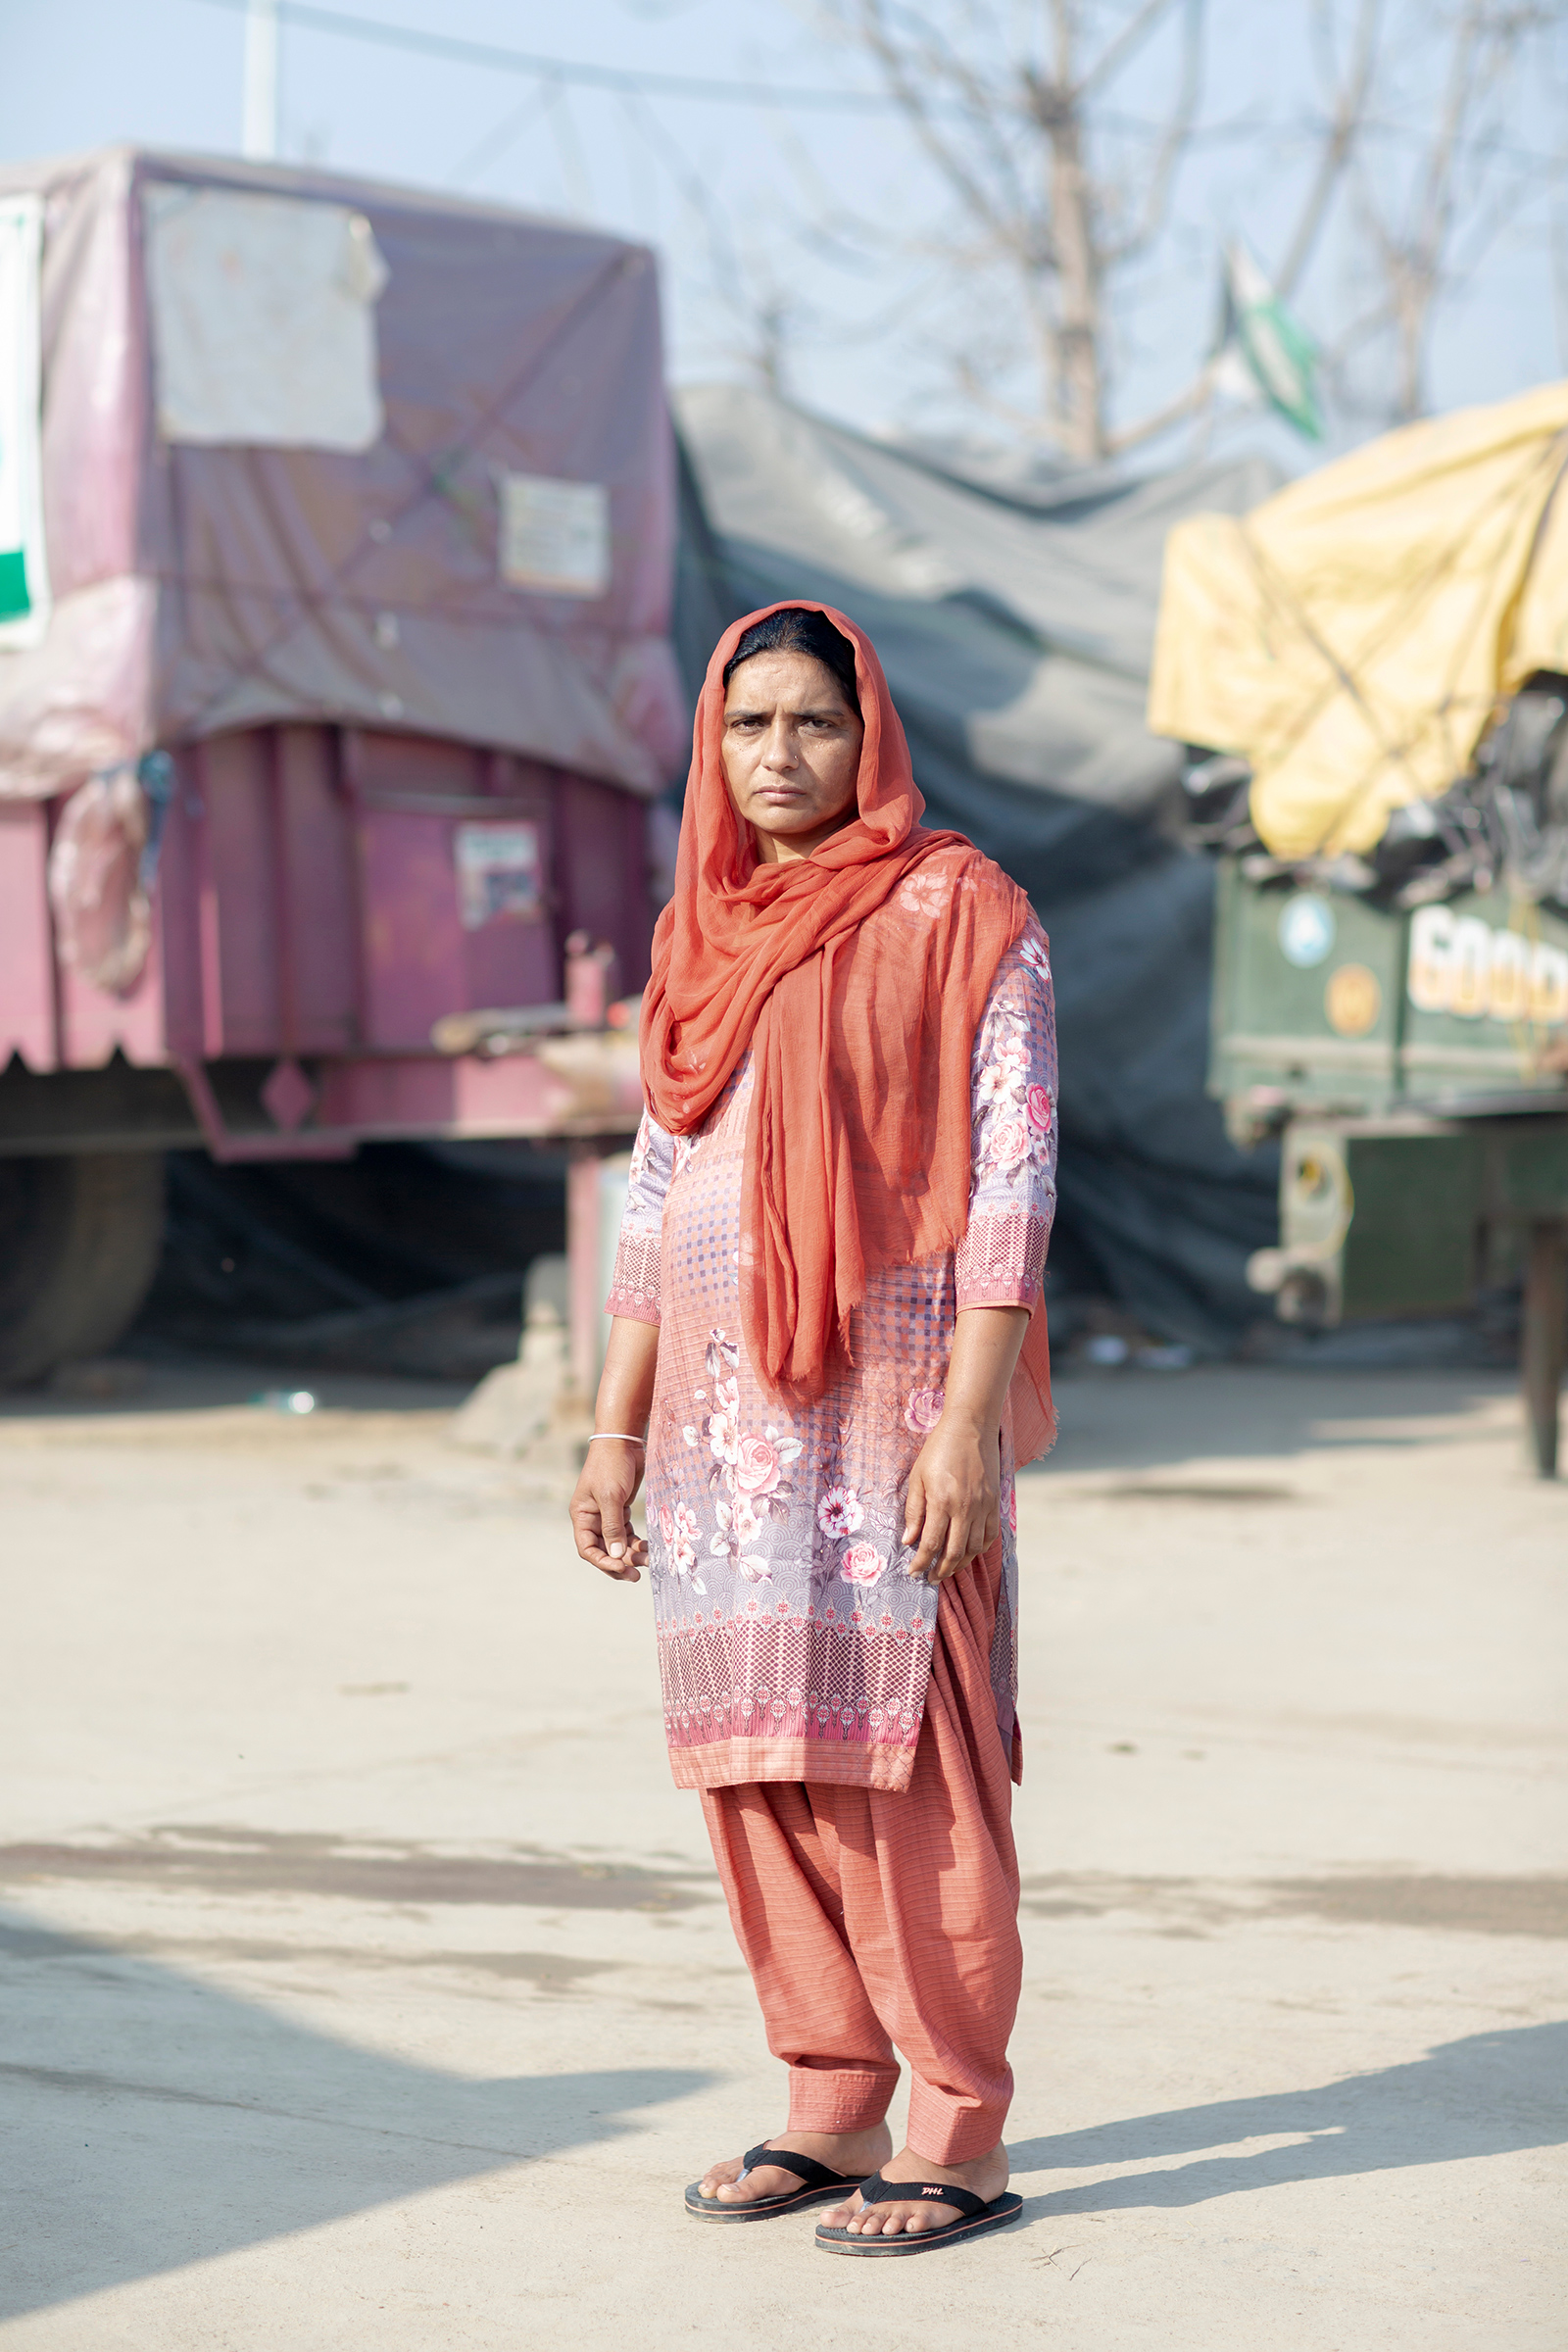 Amandeep Kaur, 41, from Talwandi, Punjab, is employed as a community health worker and as a farmer to support her two daughters. Her husband died by suicide five years ago; because she did not know her rights, she didn’t receive government compensation given to families of farmers who die by suicide. The new laws, she says, “will kill us, will destroy what little we have.” (Kanishka Sonthalia for TIME)